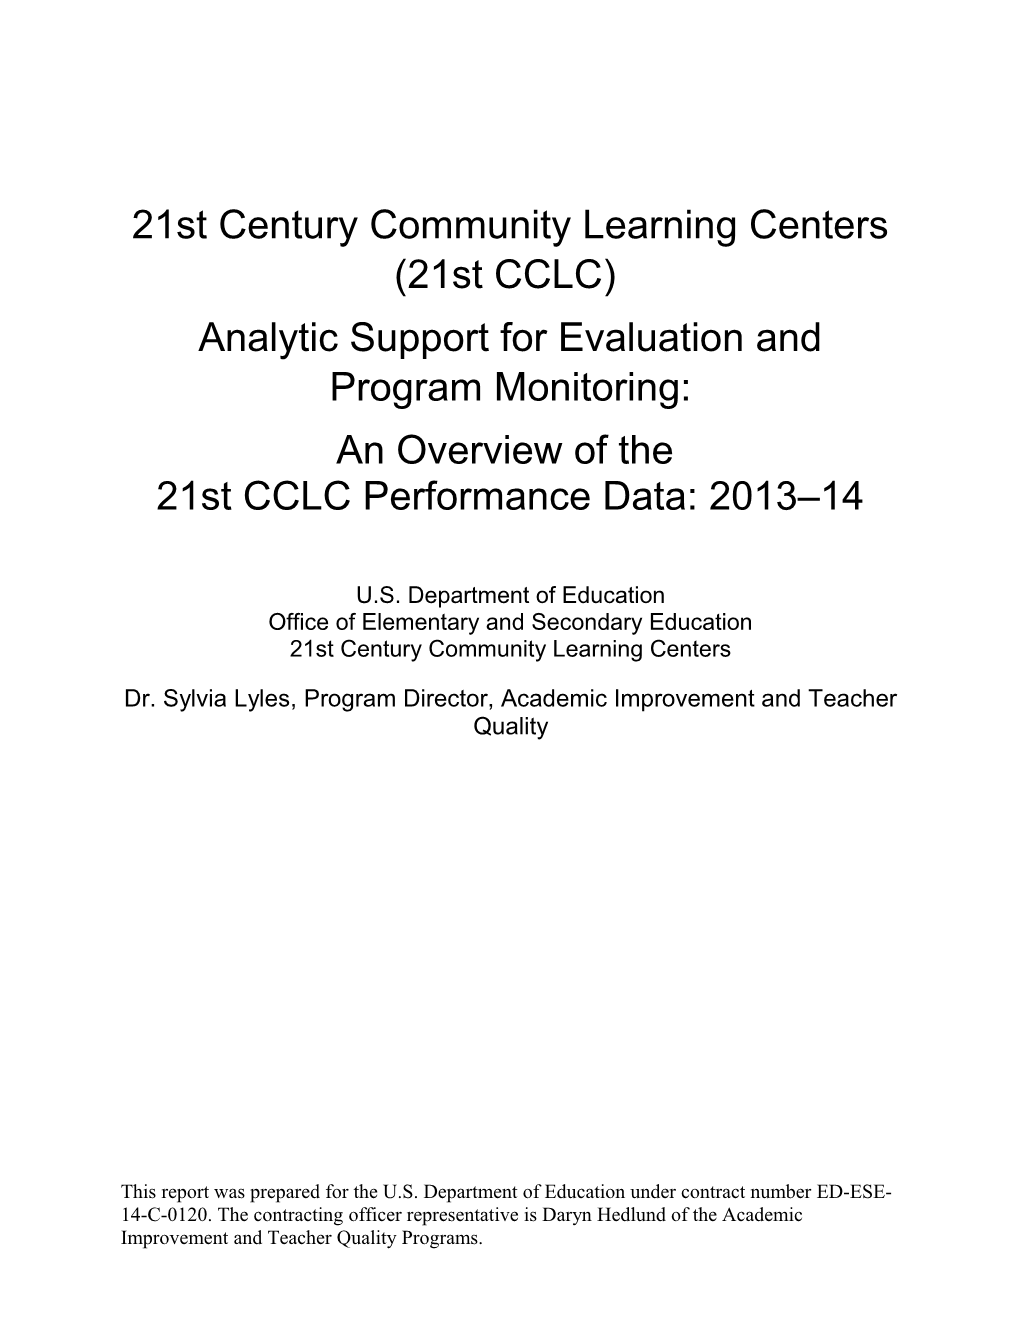 Analytic Support for Evaluation and Program Monitoring 2013-14 (Msword)